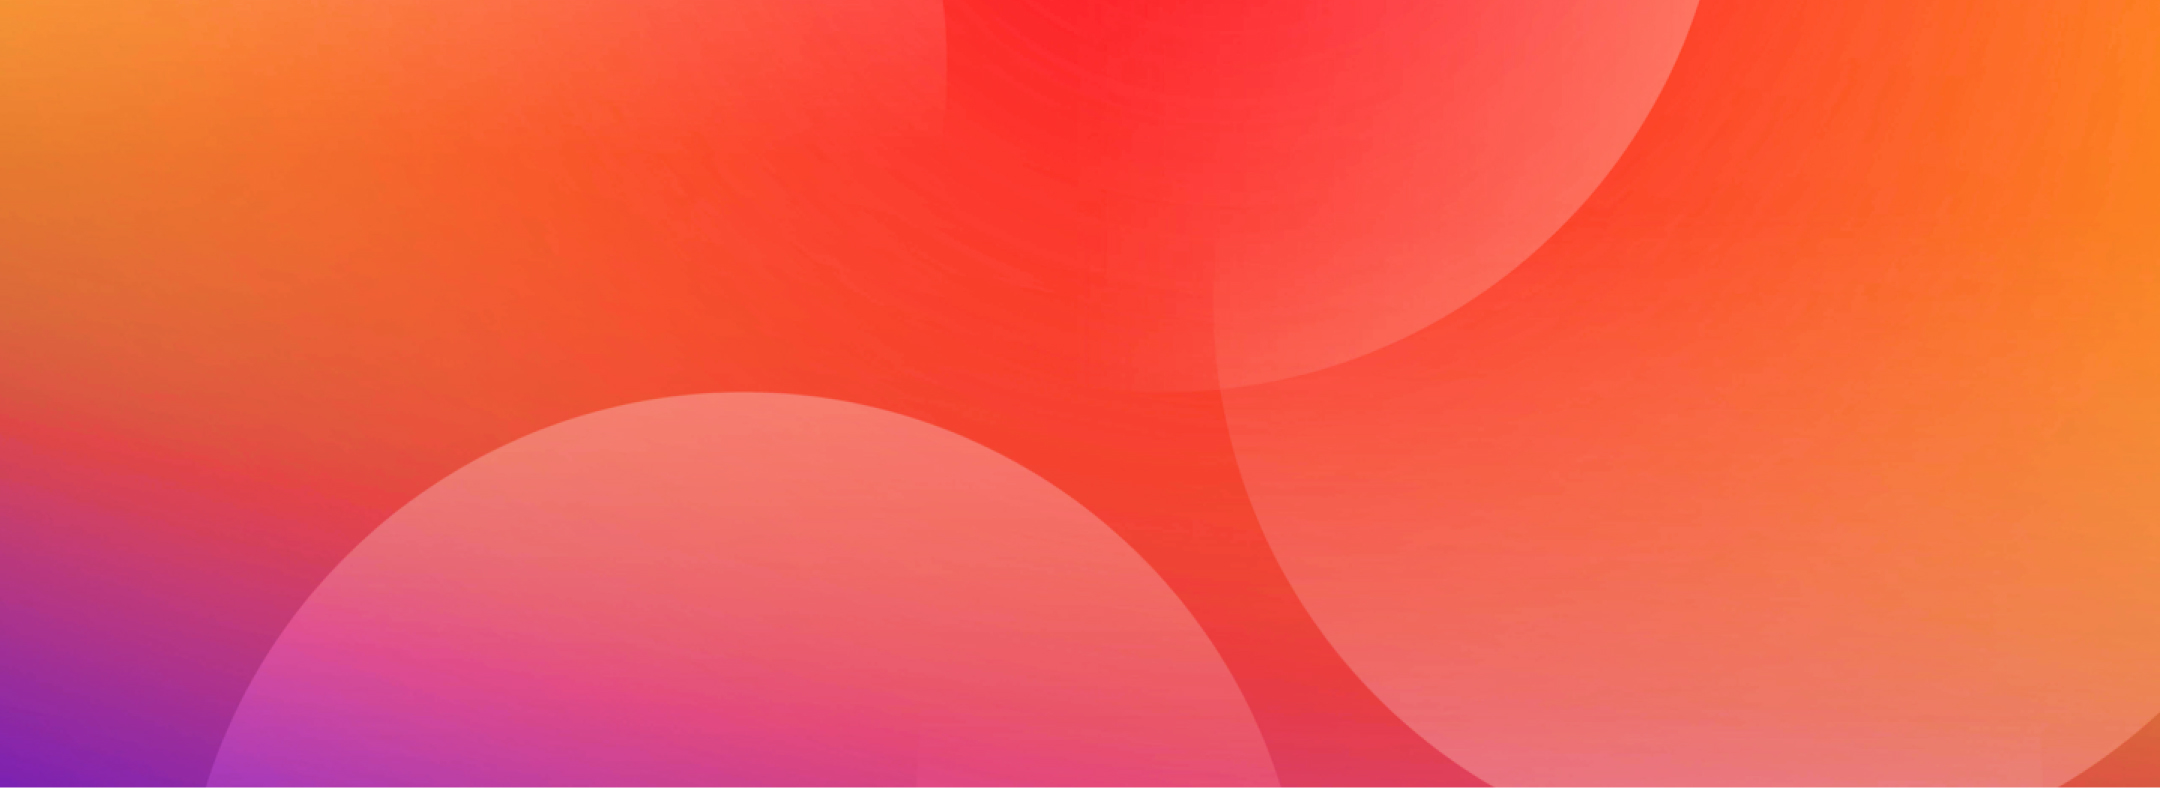 Orange and purple background with circles